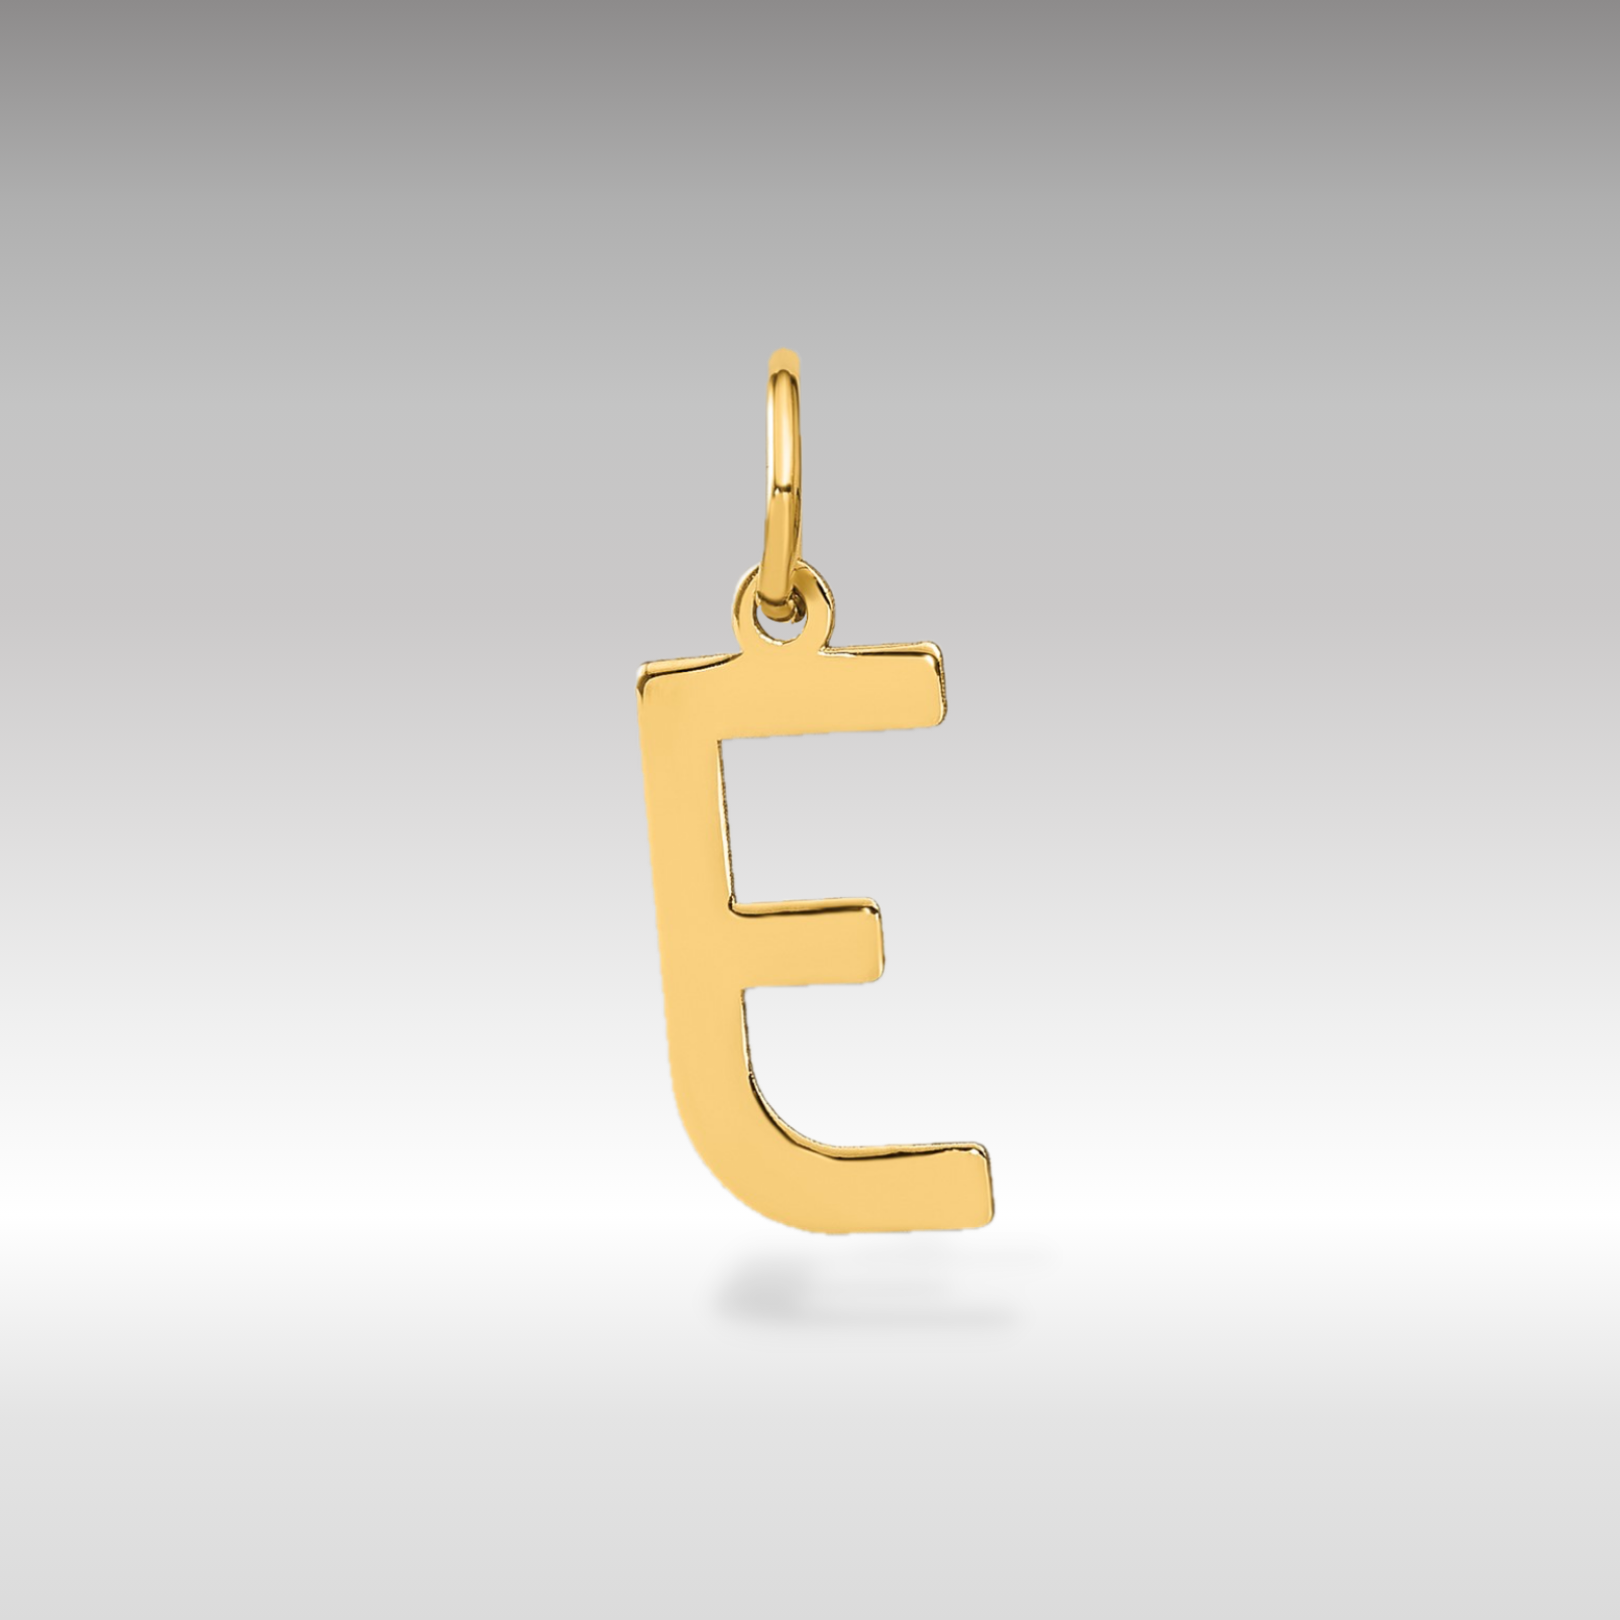 14K Gold Letter "E" Initial Pendant - Charlie & Co. Jewelry